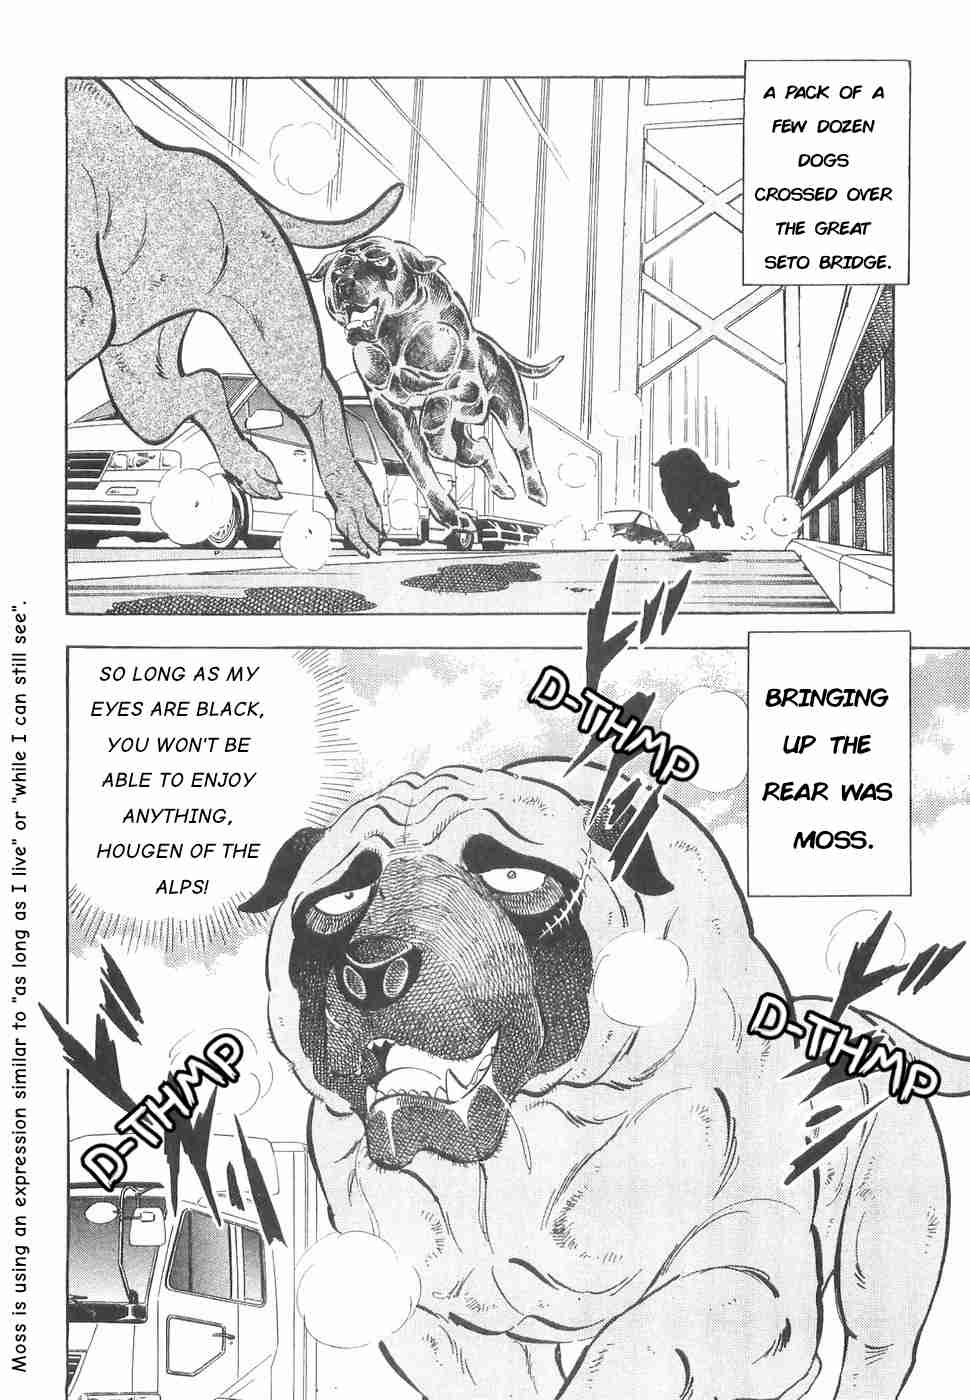 Ginga Densetsu Weed Vol. 19 Ch. 168 A Cry Of Victory